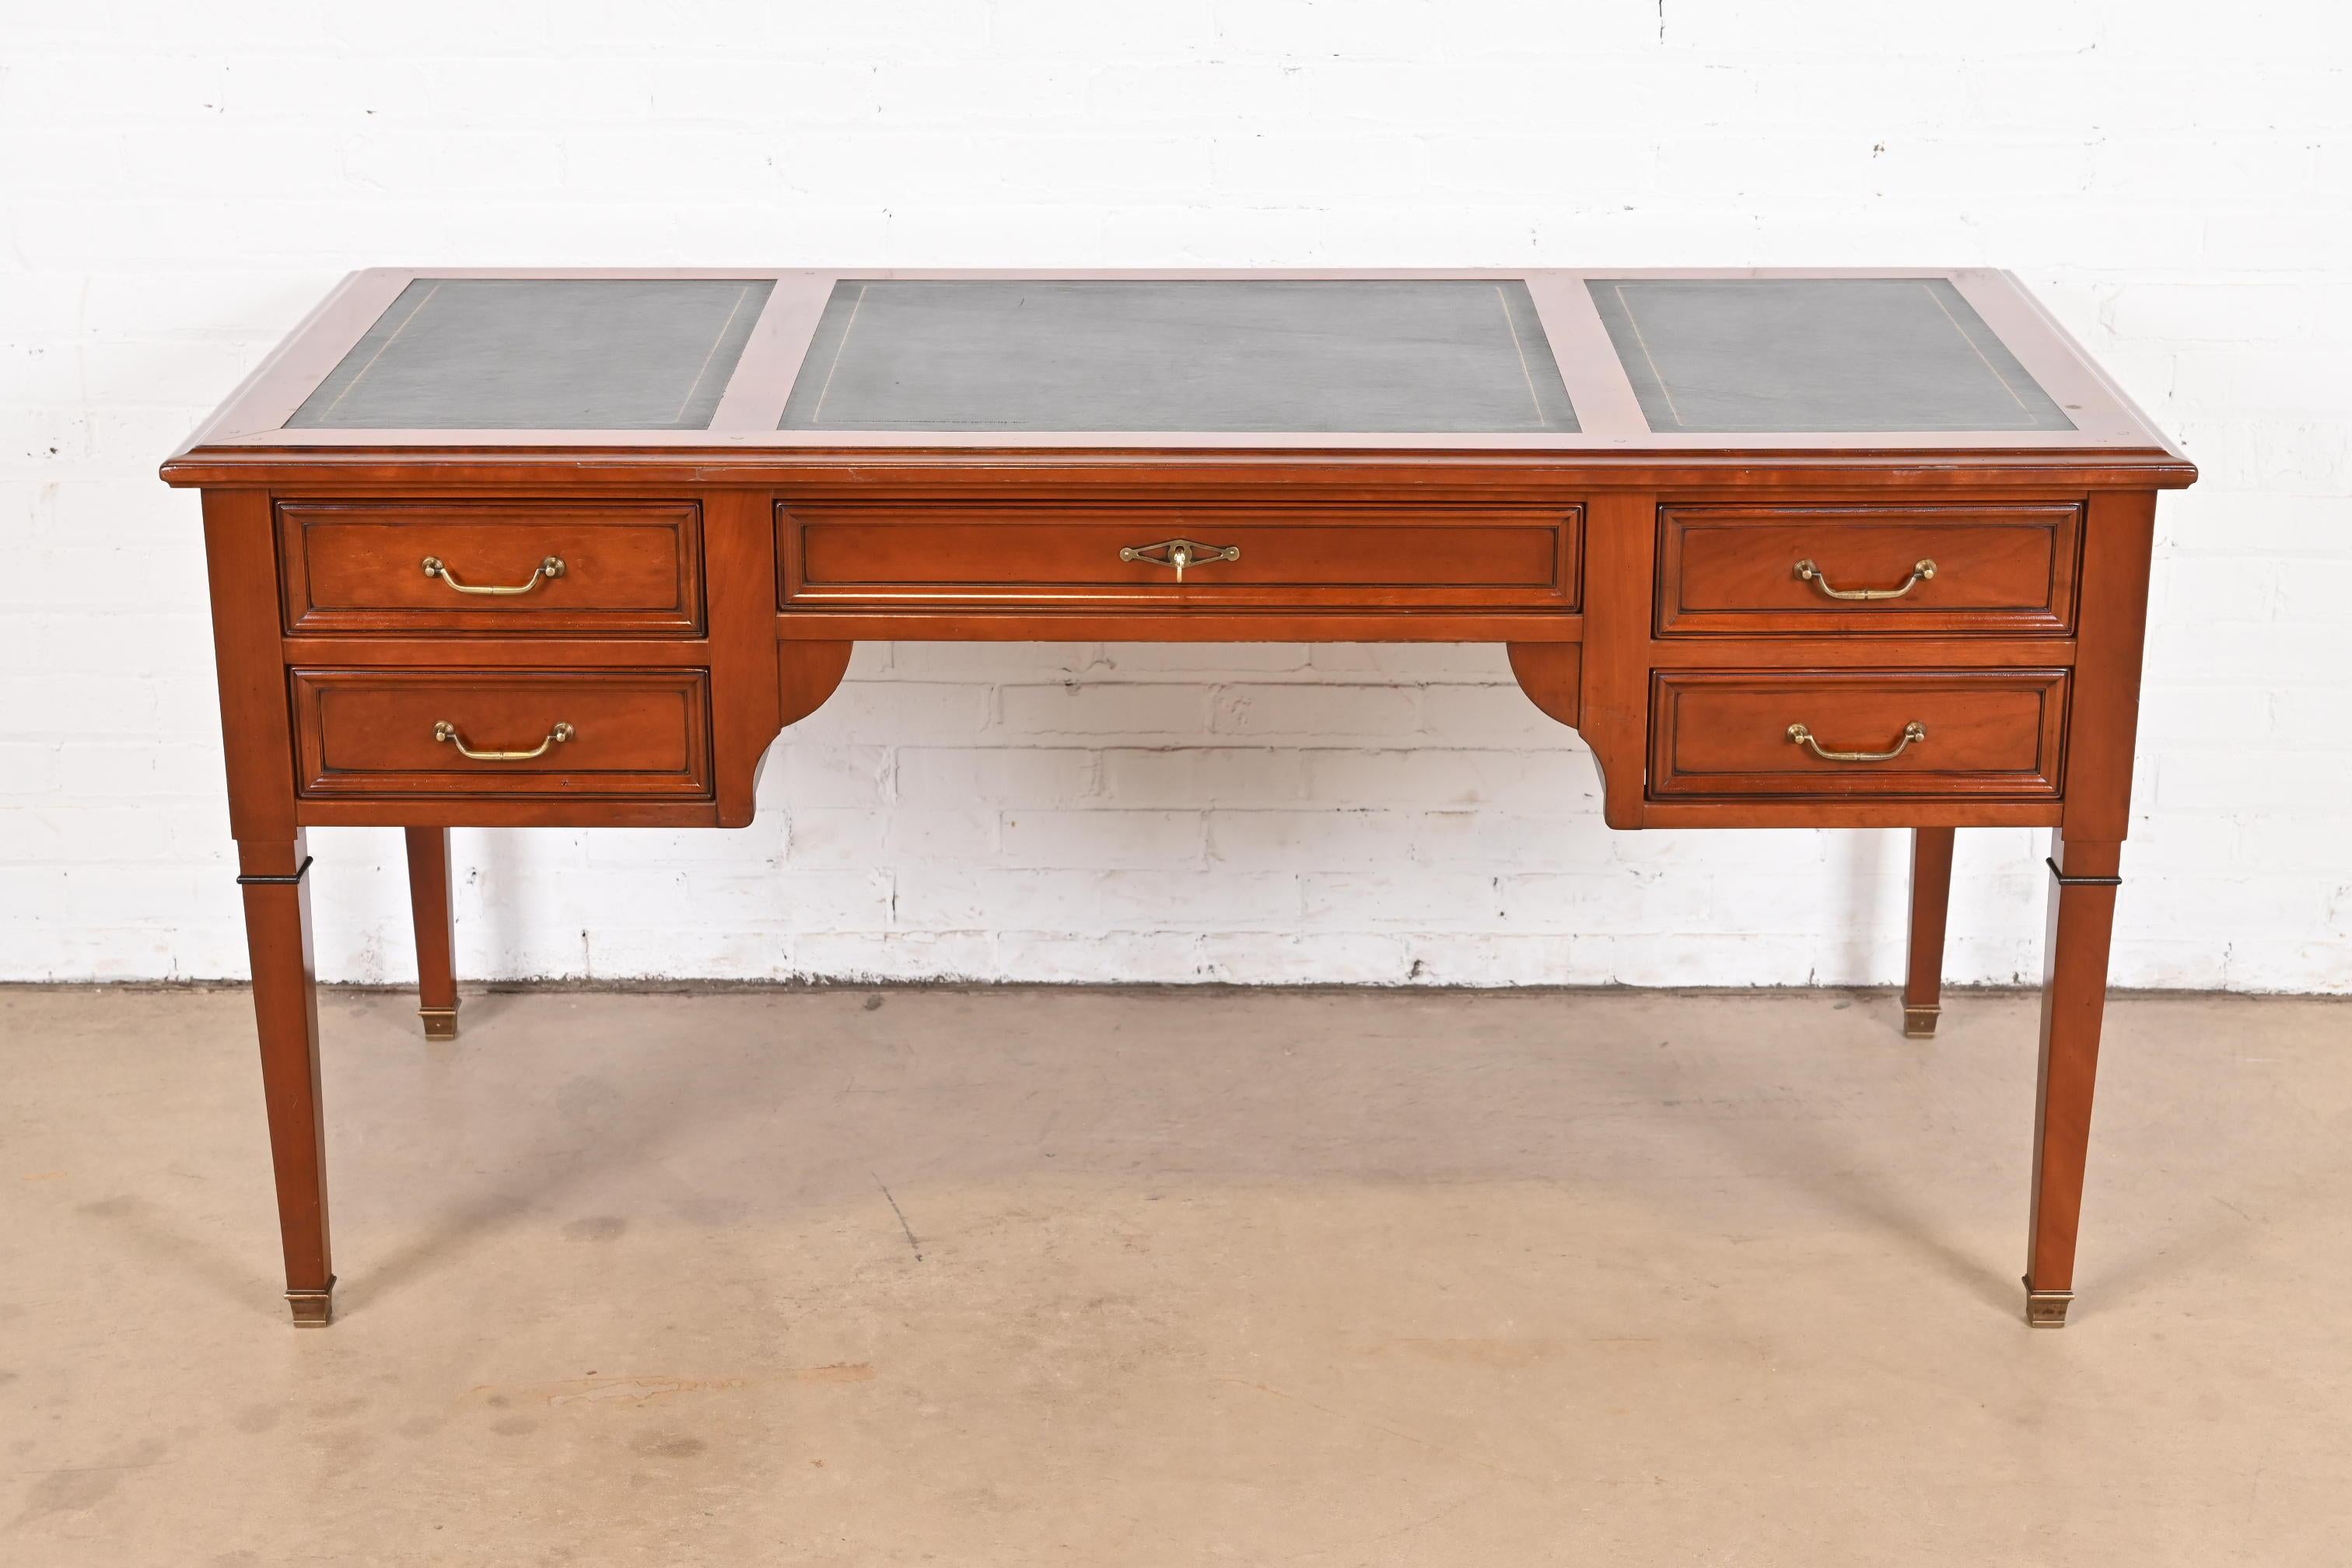 An exceptional French Regency Louis XVI style bureau plat desk or writing desk

By Grange

France, Circa Late 20th Century

Solid cherry wood, with brass hardware and embossed leather top.

Measures: 63